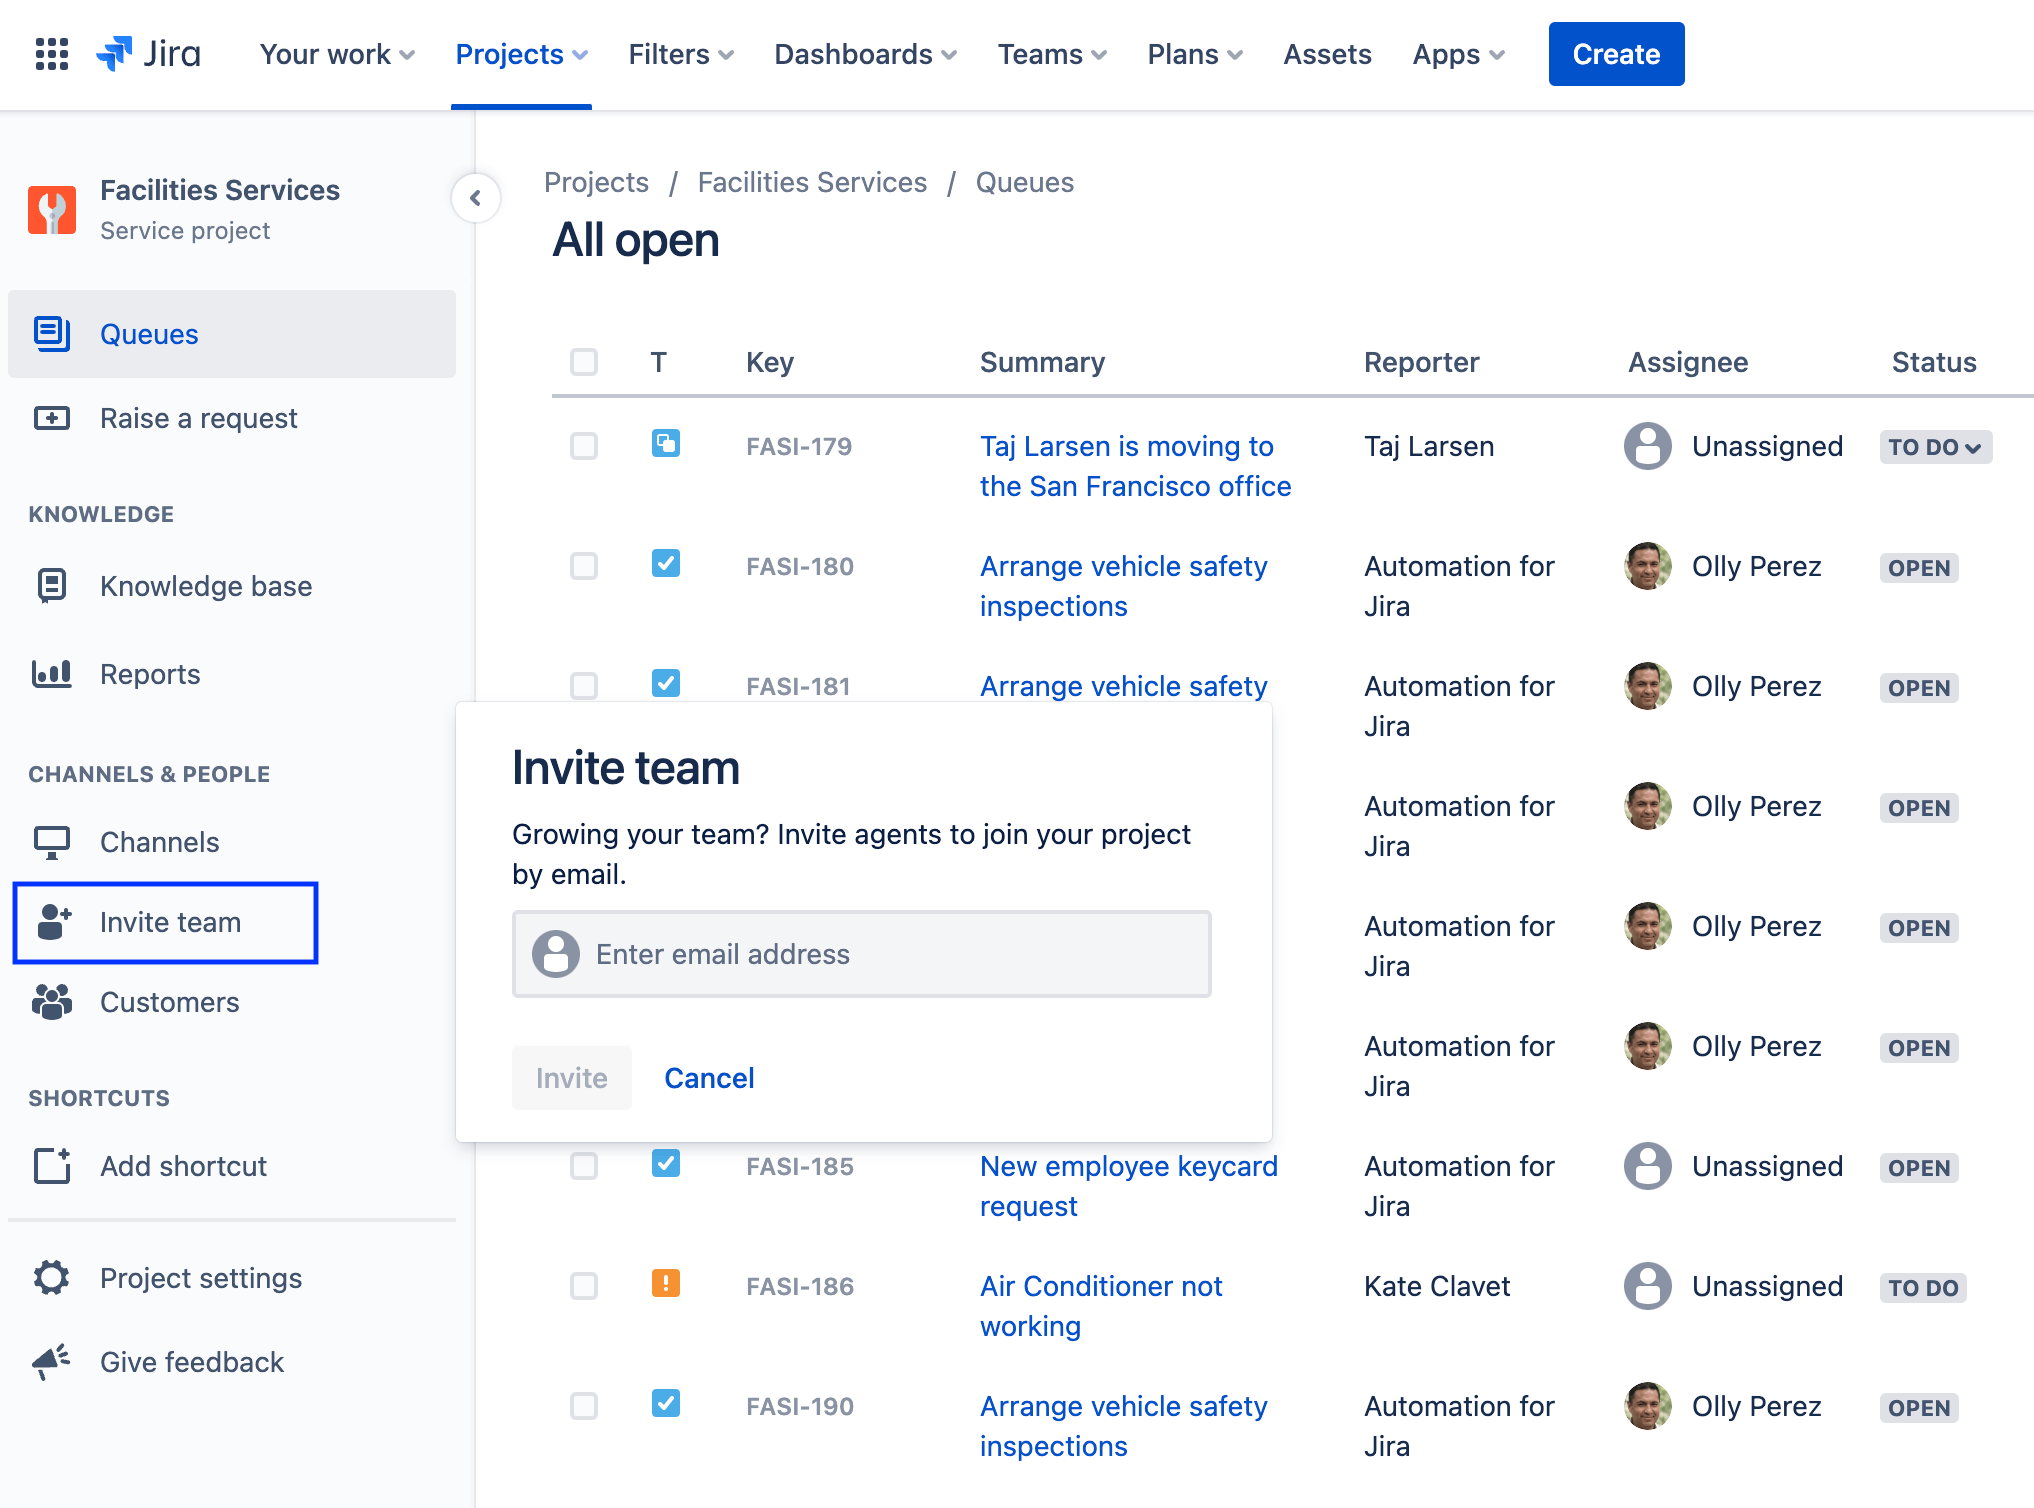 screenshot of Invite your team to use Jira Service Management